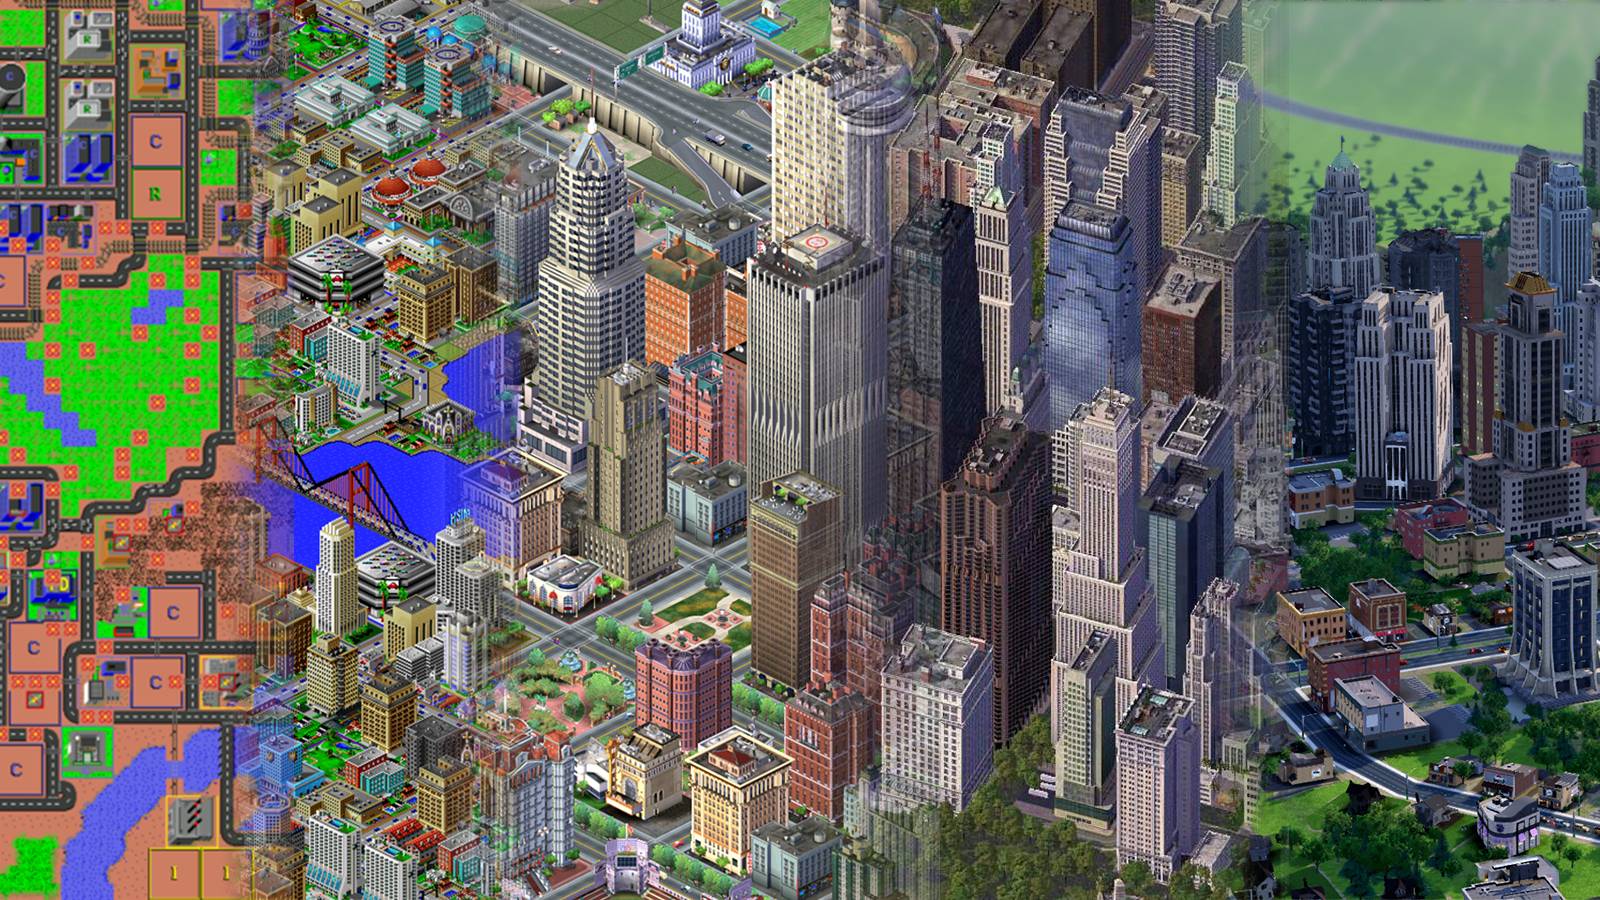 I made a wallpaper showing the Evolution of SimCity